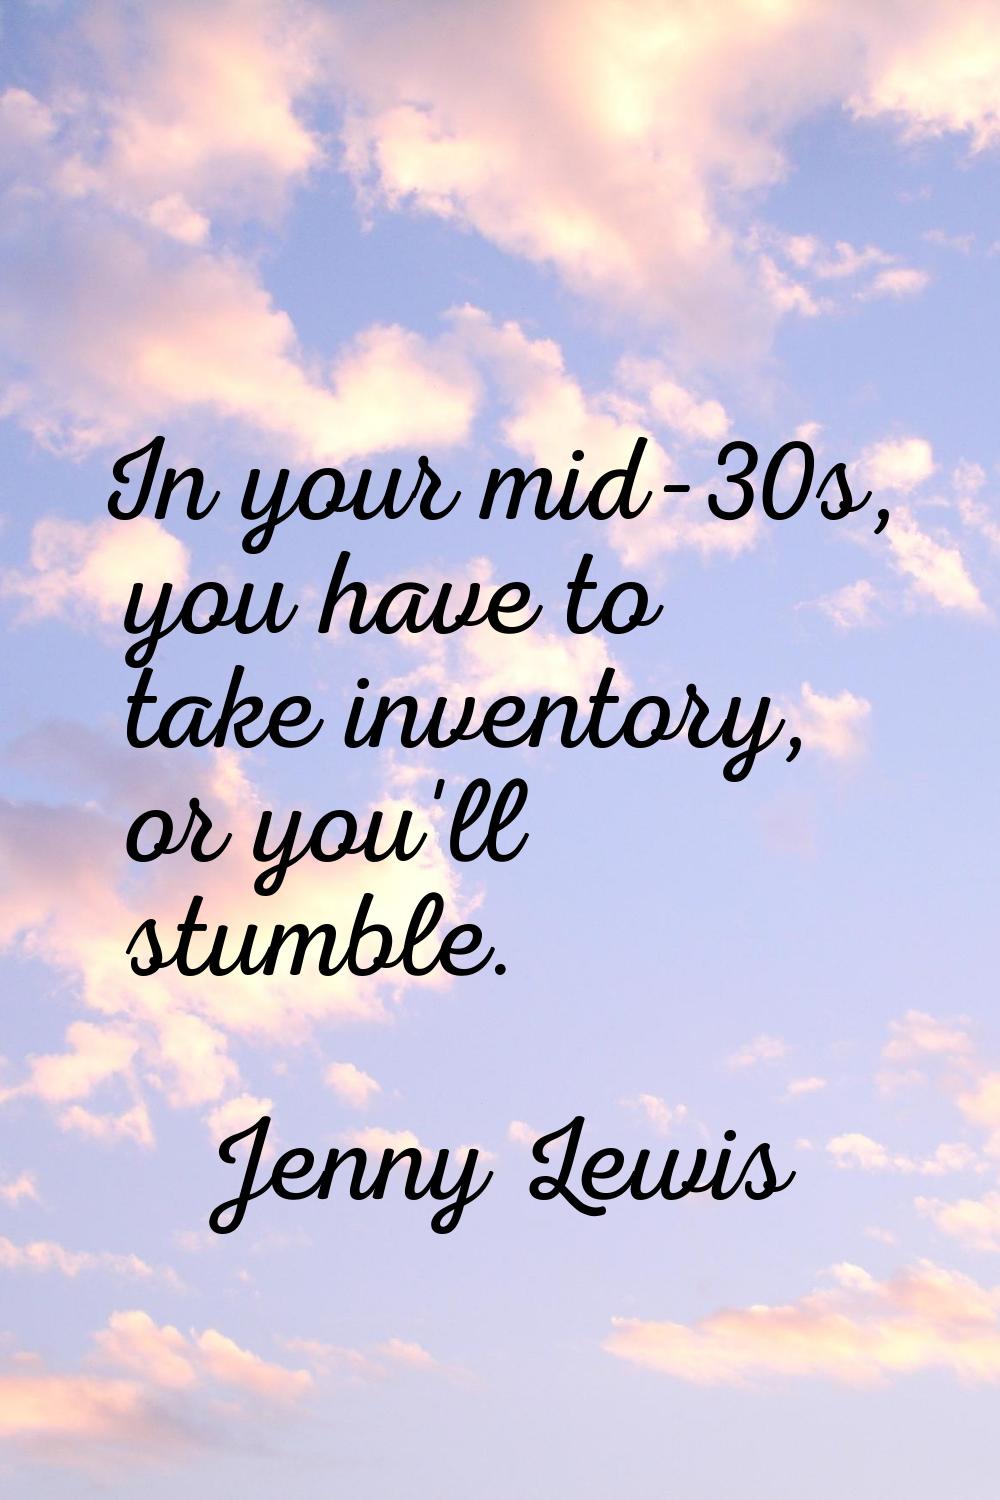 In your mid-30s, you have to take inventory, or you'll stumble.